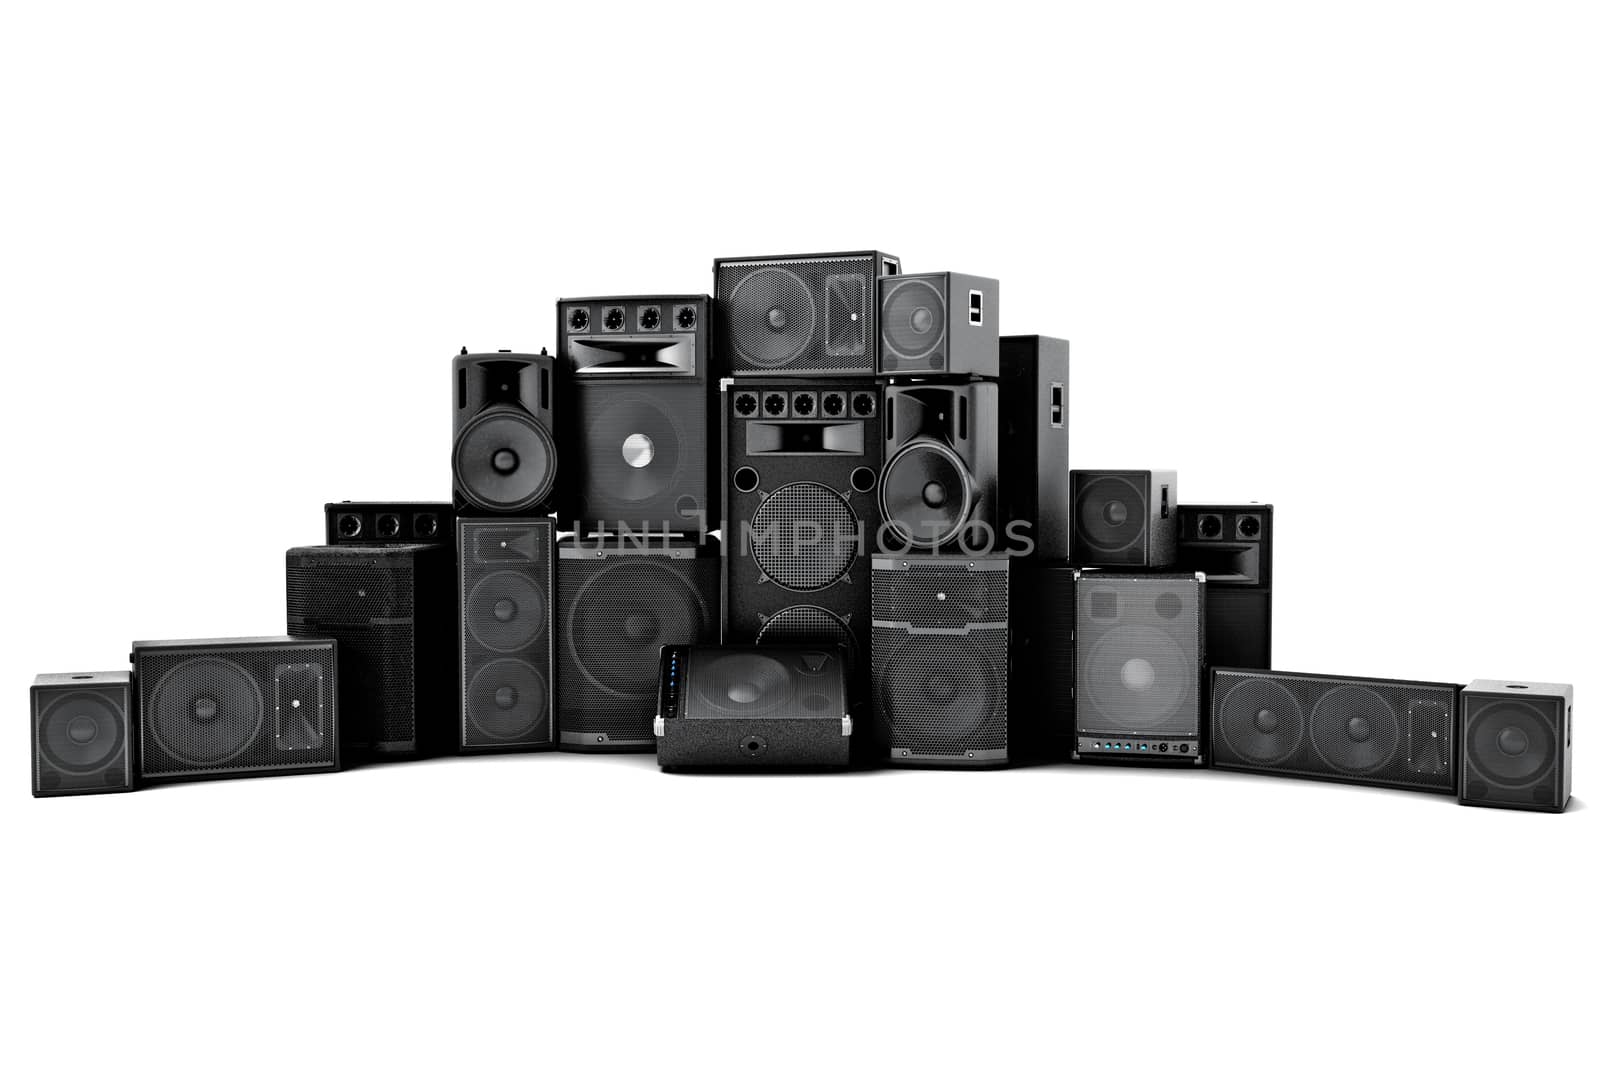 Large group of speakers in a row, loud or abused concept on a white background.